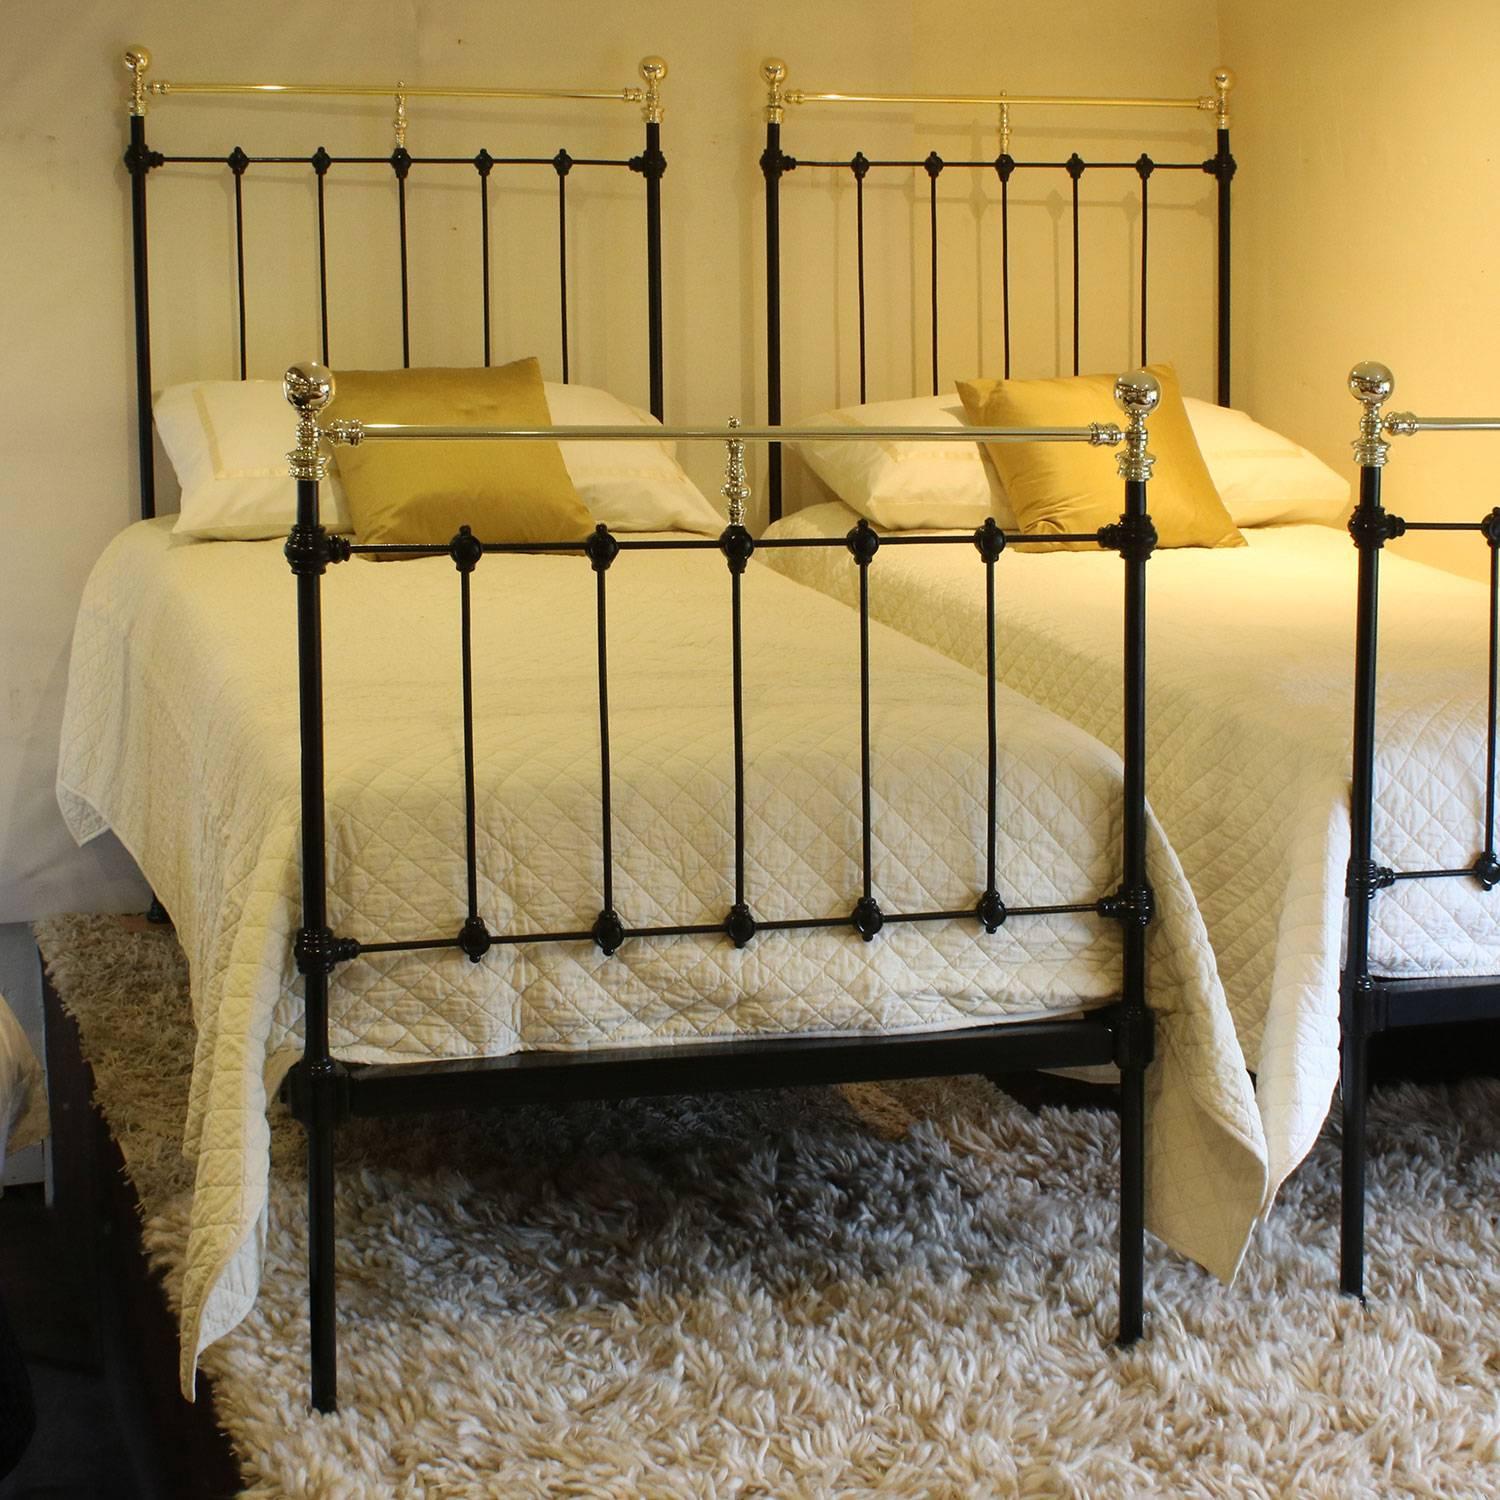 A matching pair of twin brass and iron beds finished in black with straight brass top rails.

These beds accept 3 ft wide (36 inch or 90 cm) bases and mattresses.

The price is for the beds alone, the bases, mattresses, bedding and linen are